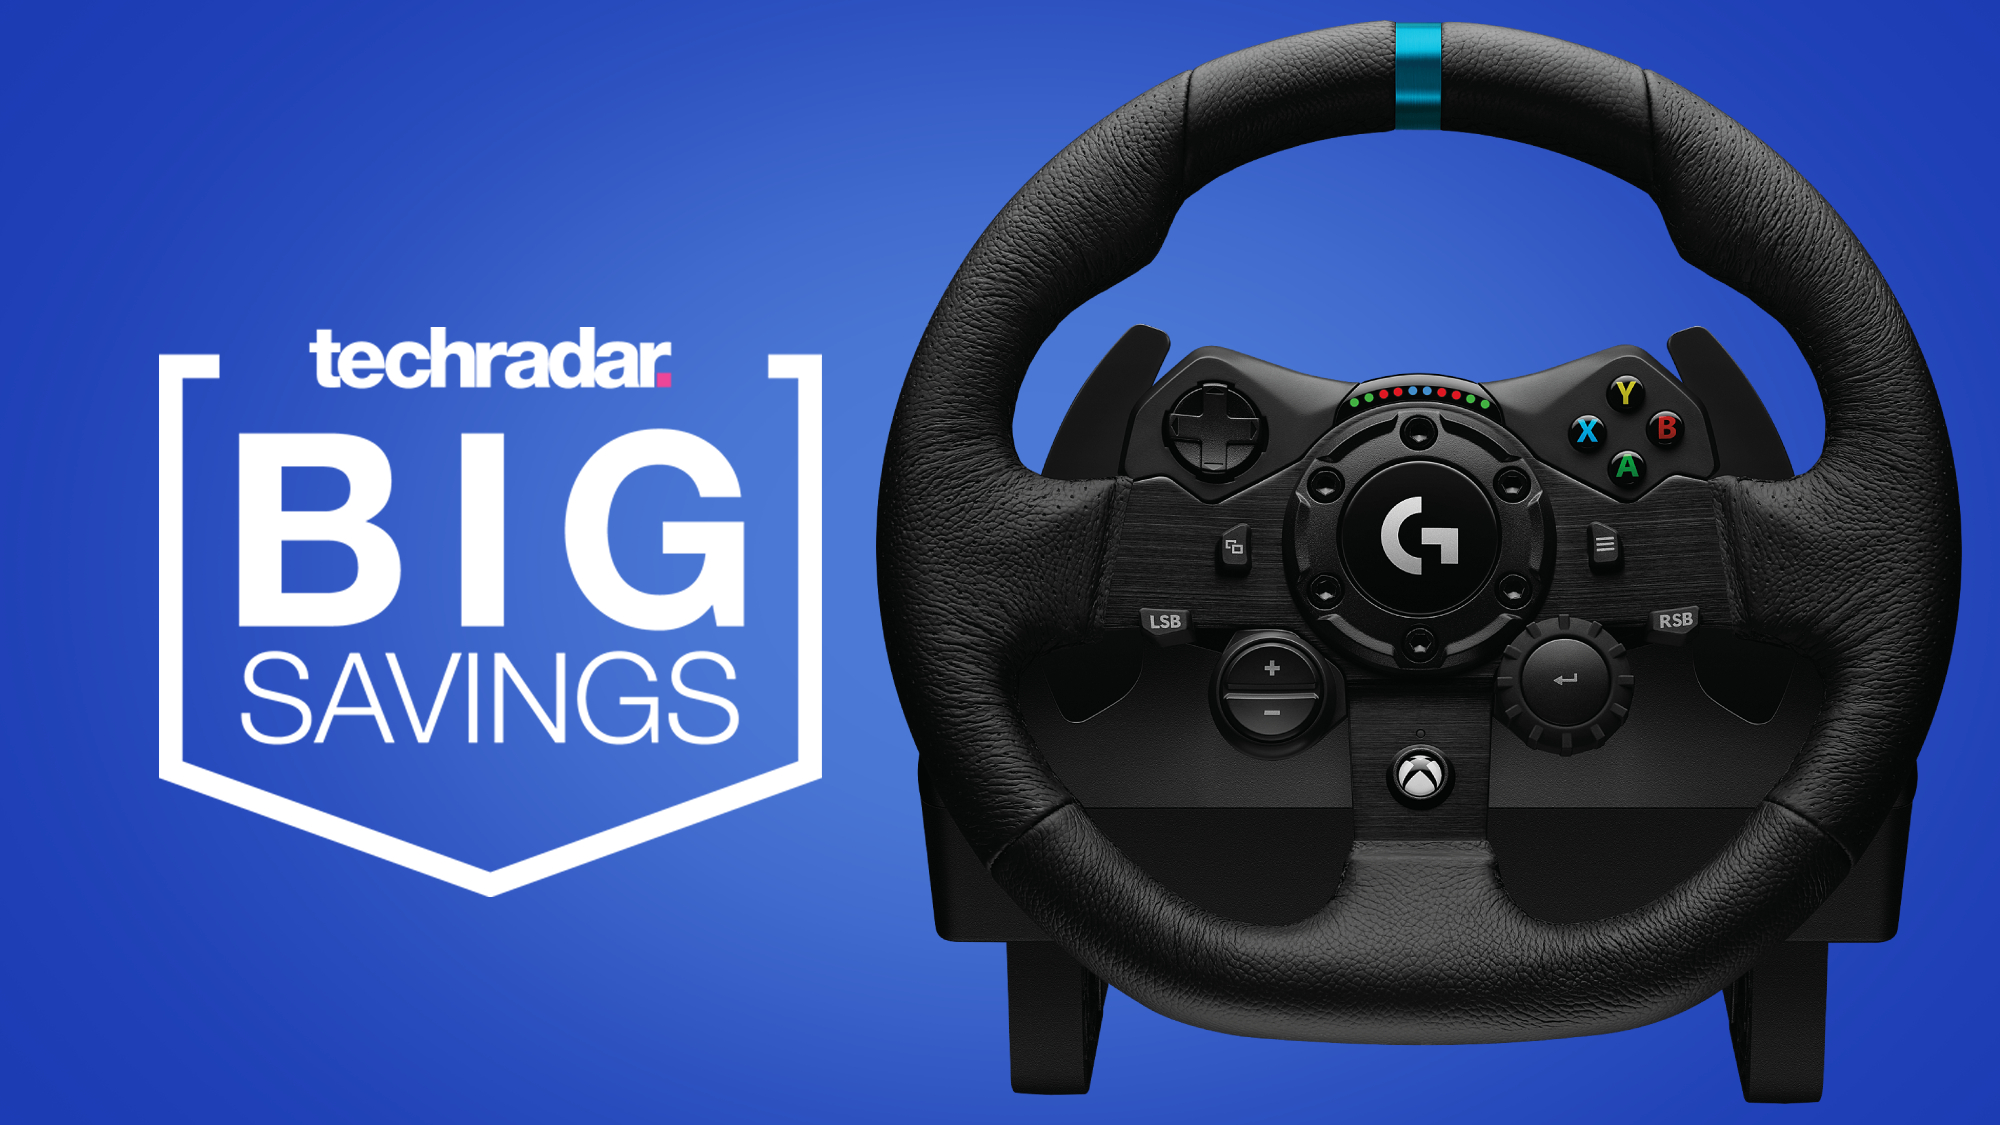 Gran Turismo 7 Steering Wheel Compatibility List - Updated